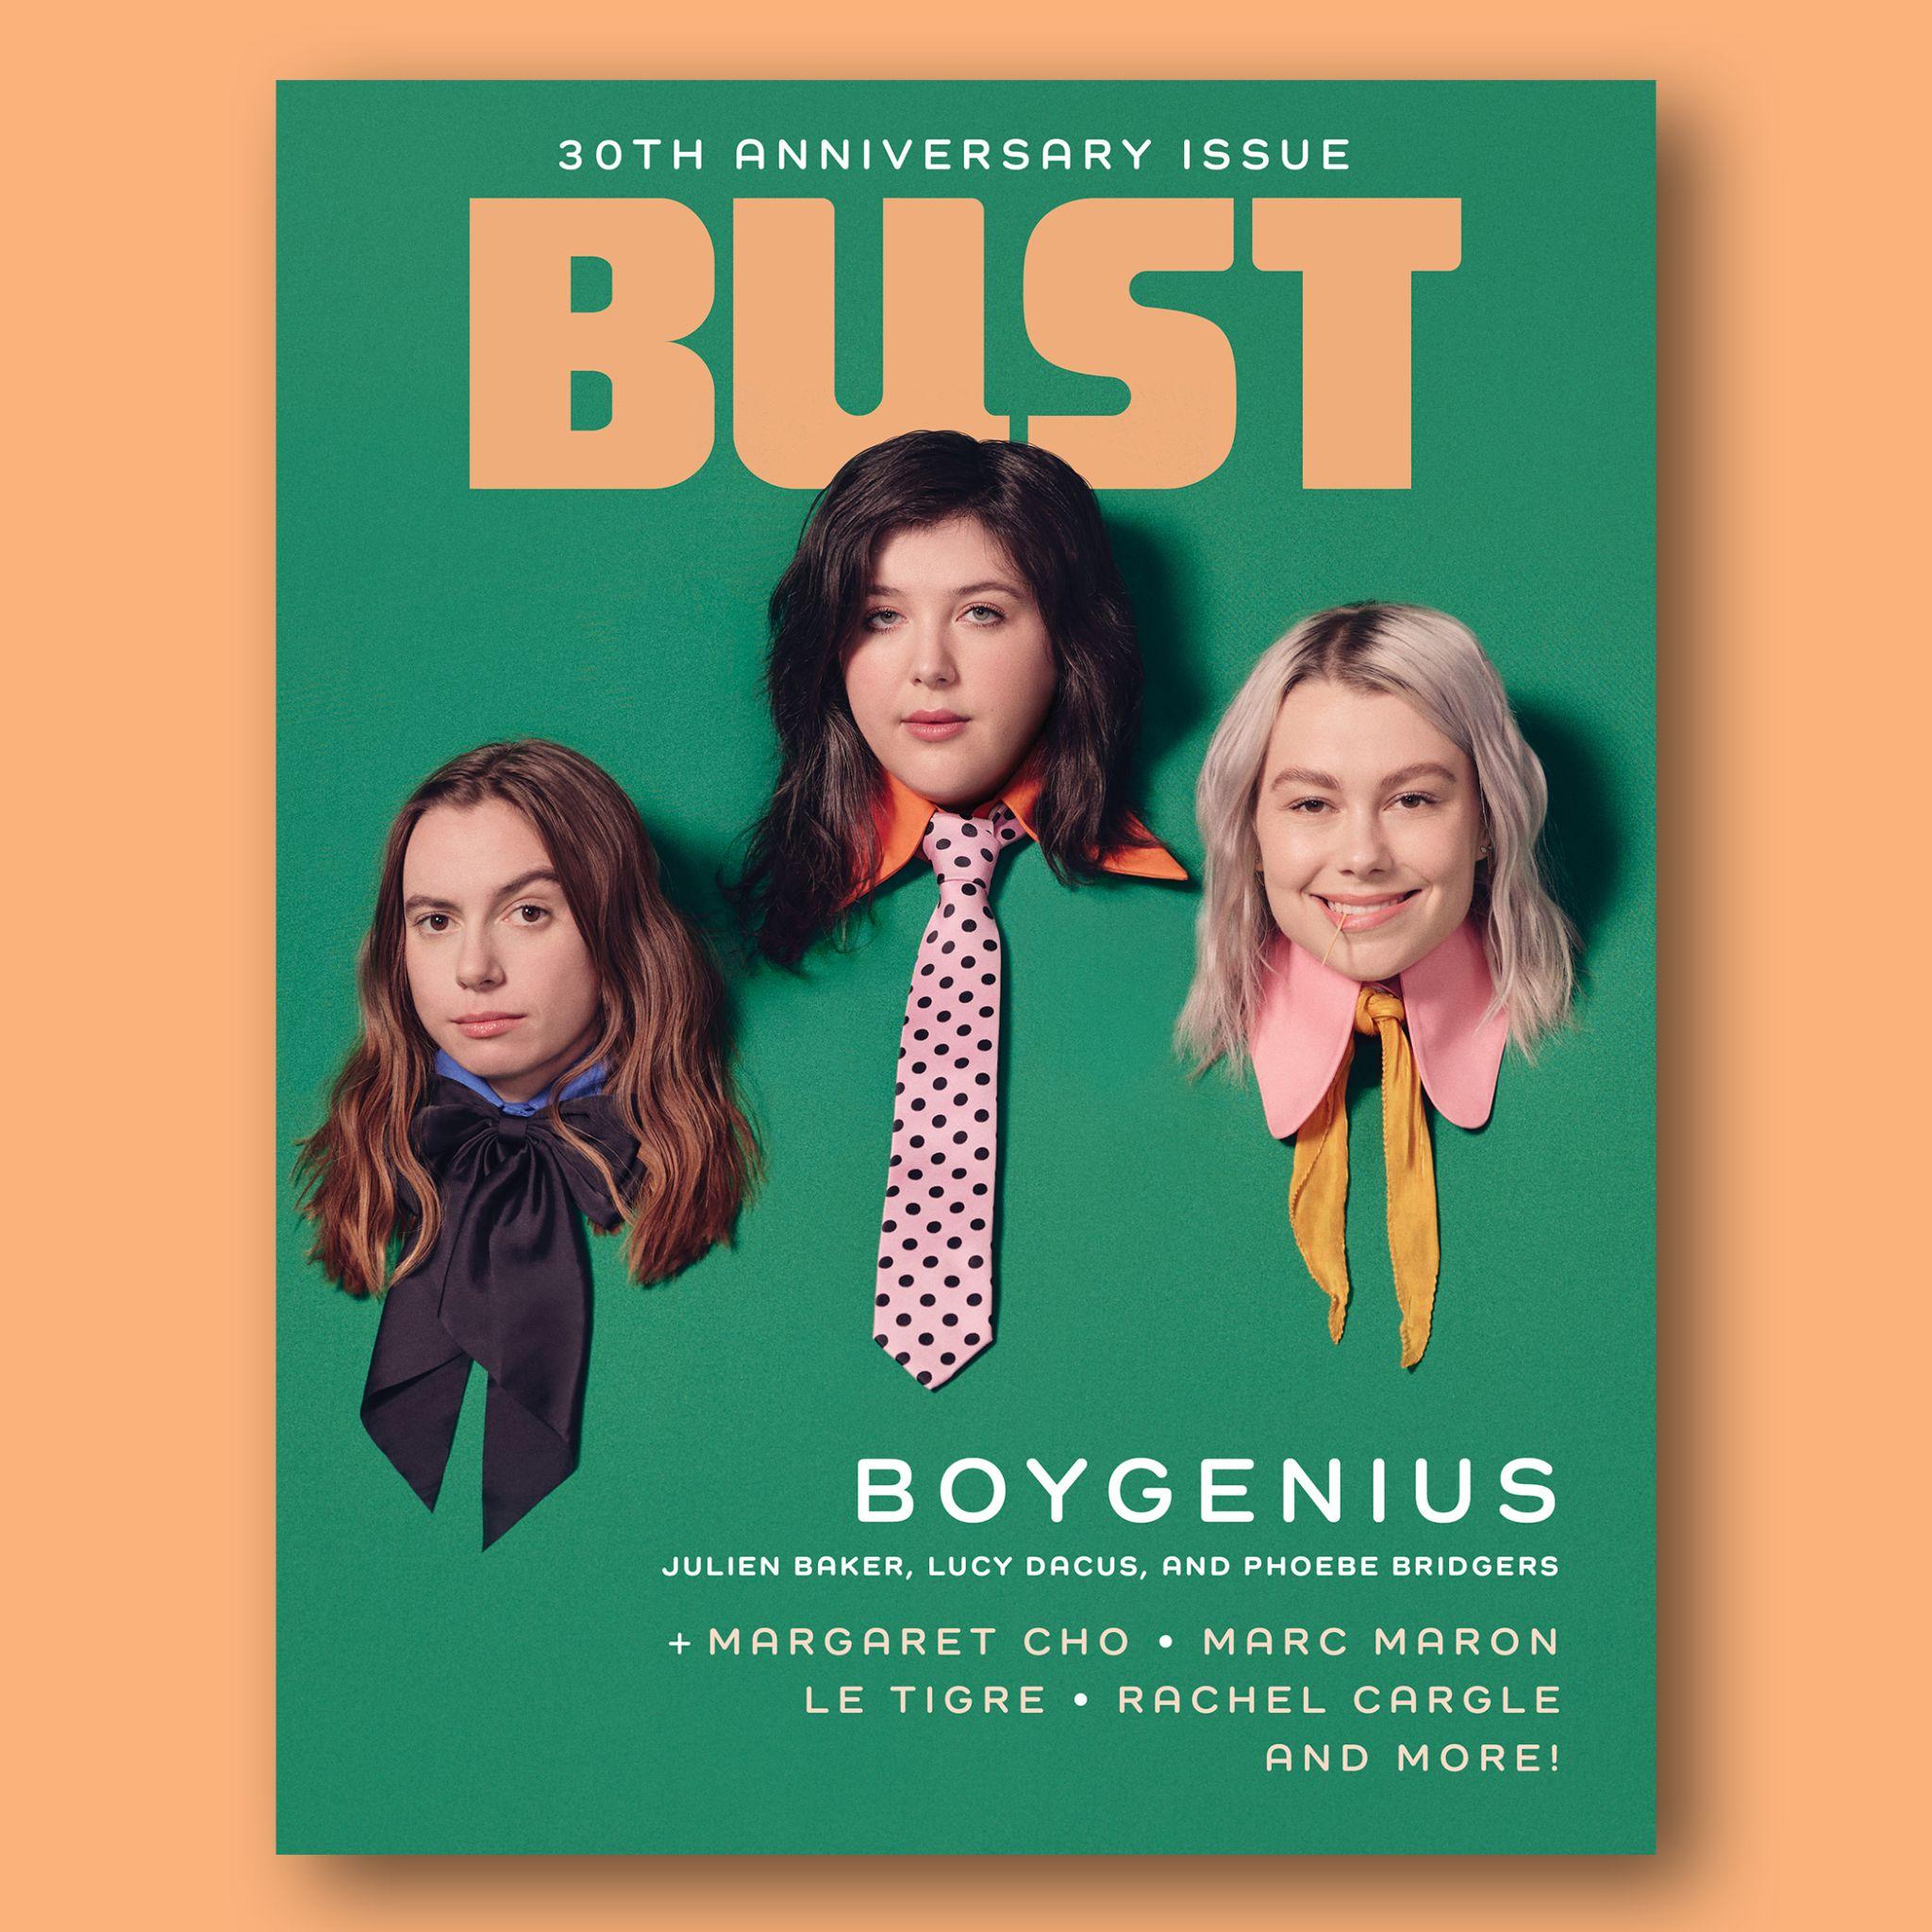 BUST's 30th Anniversary Issue Features Boygenuis, Margaret Cho